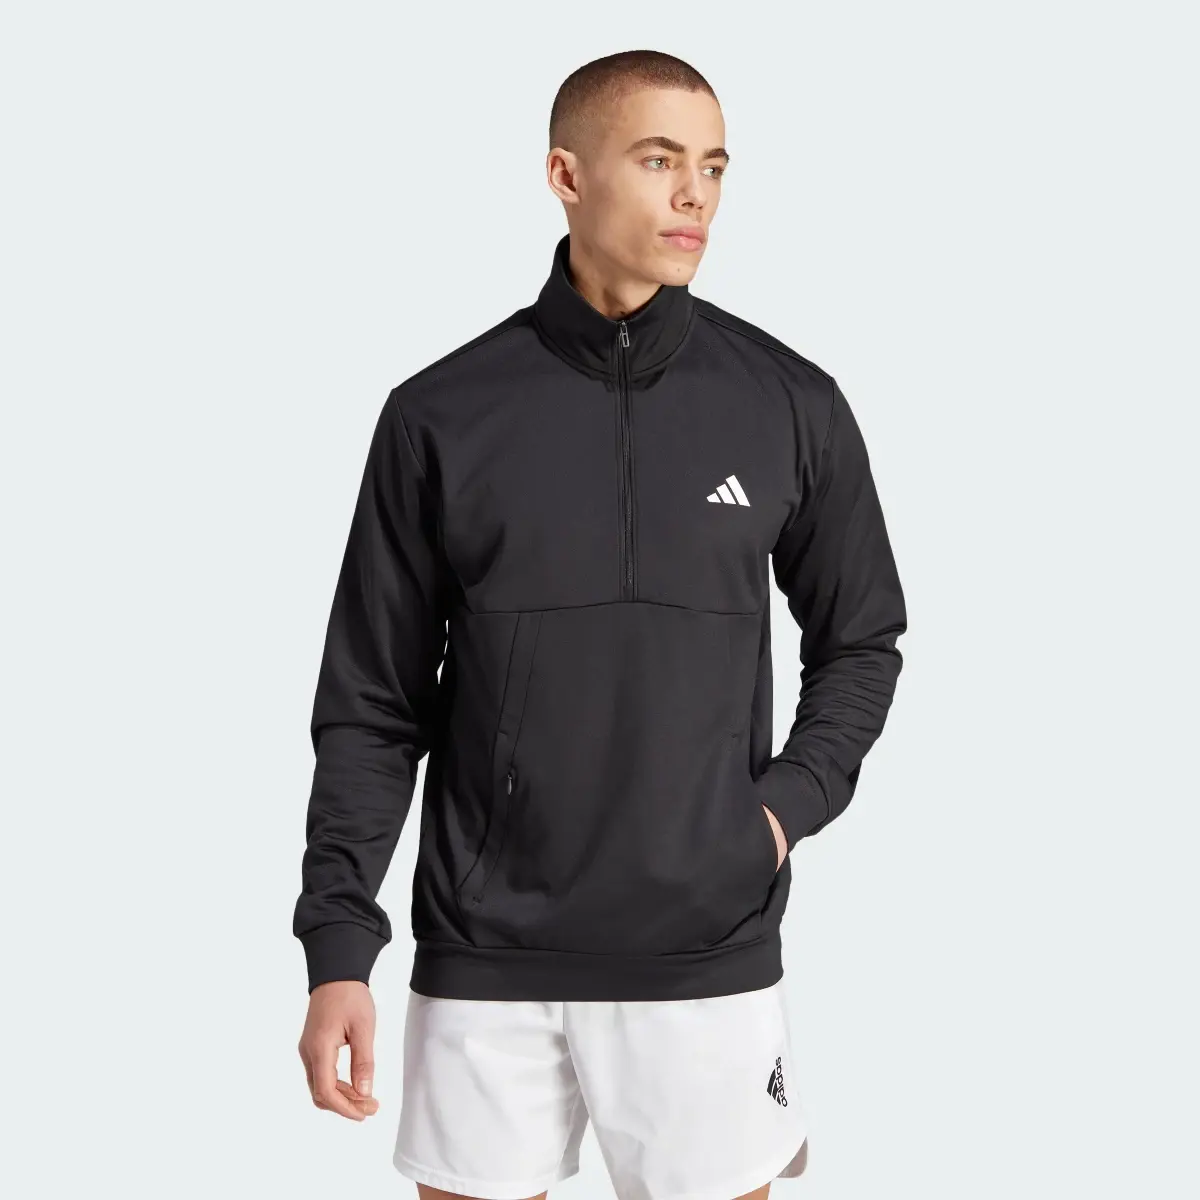 Adidas Game and Go Small Logo Training 1/4 Zip Top. 2